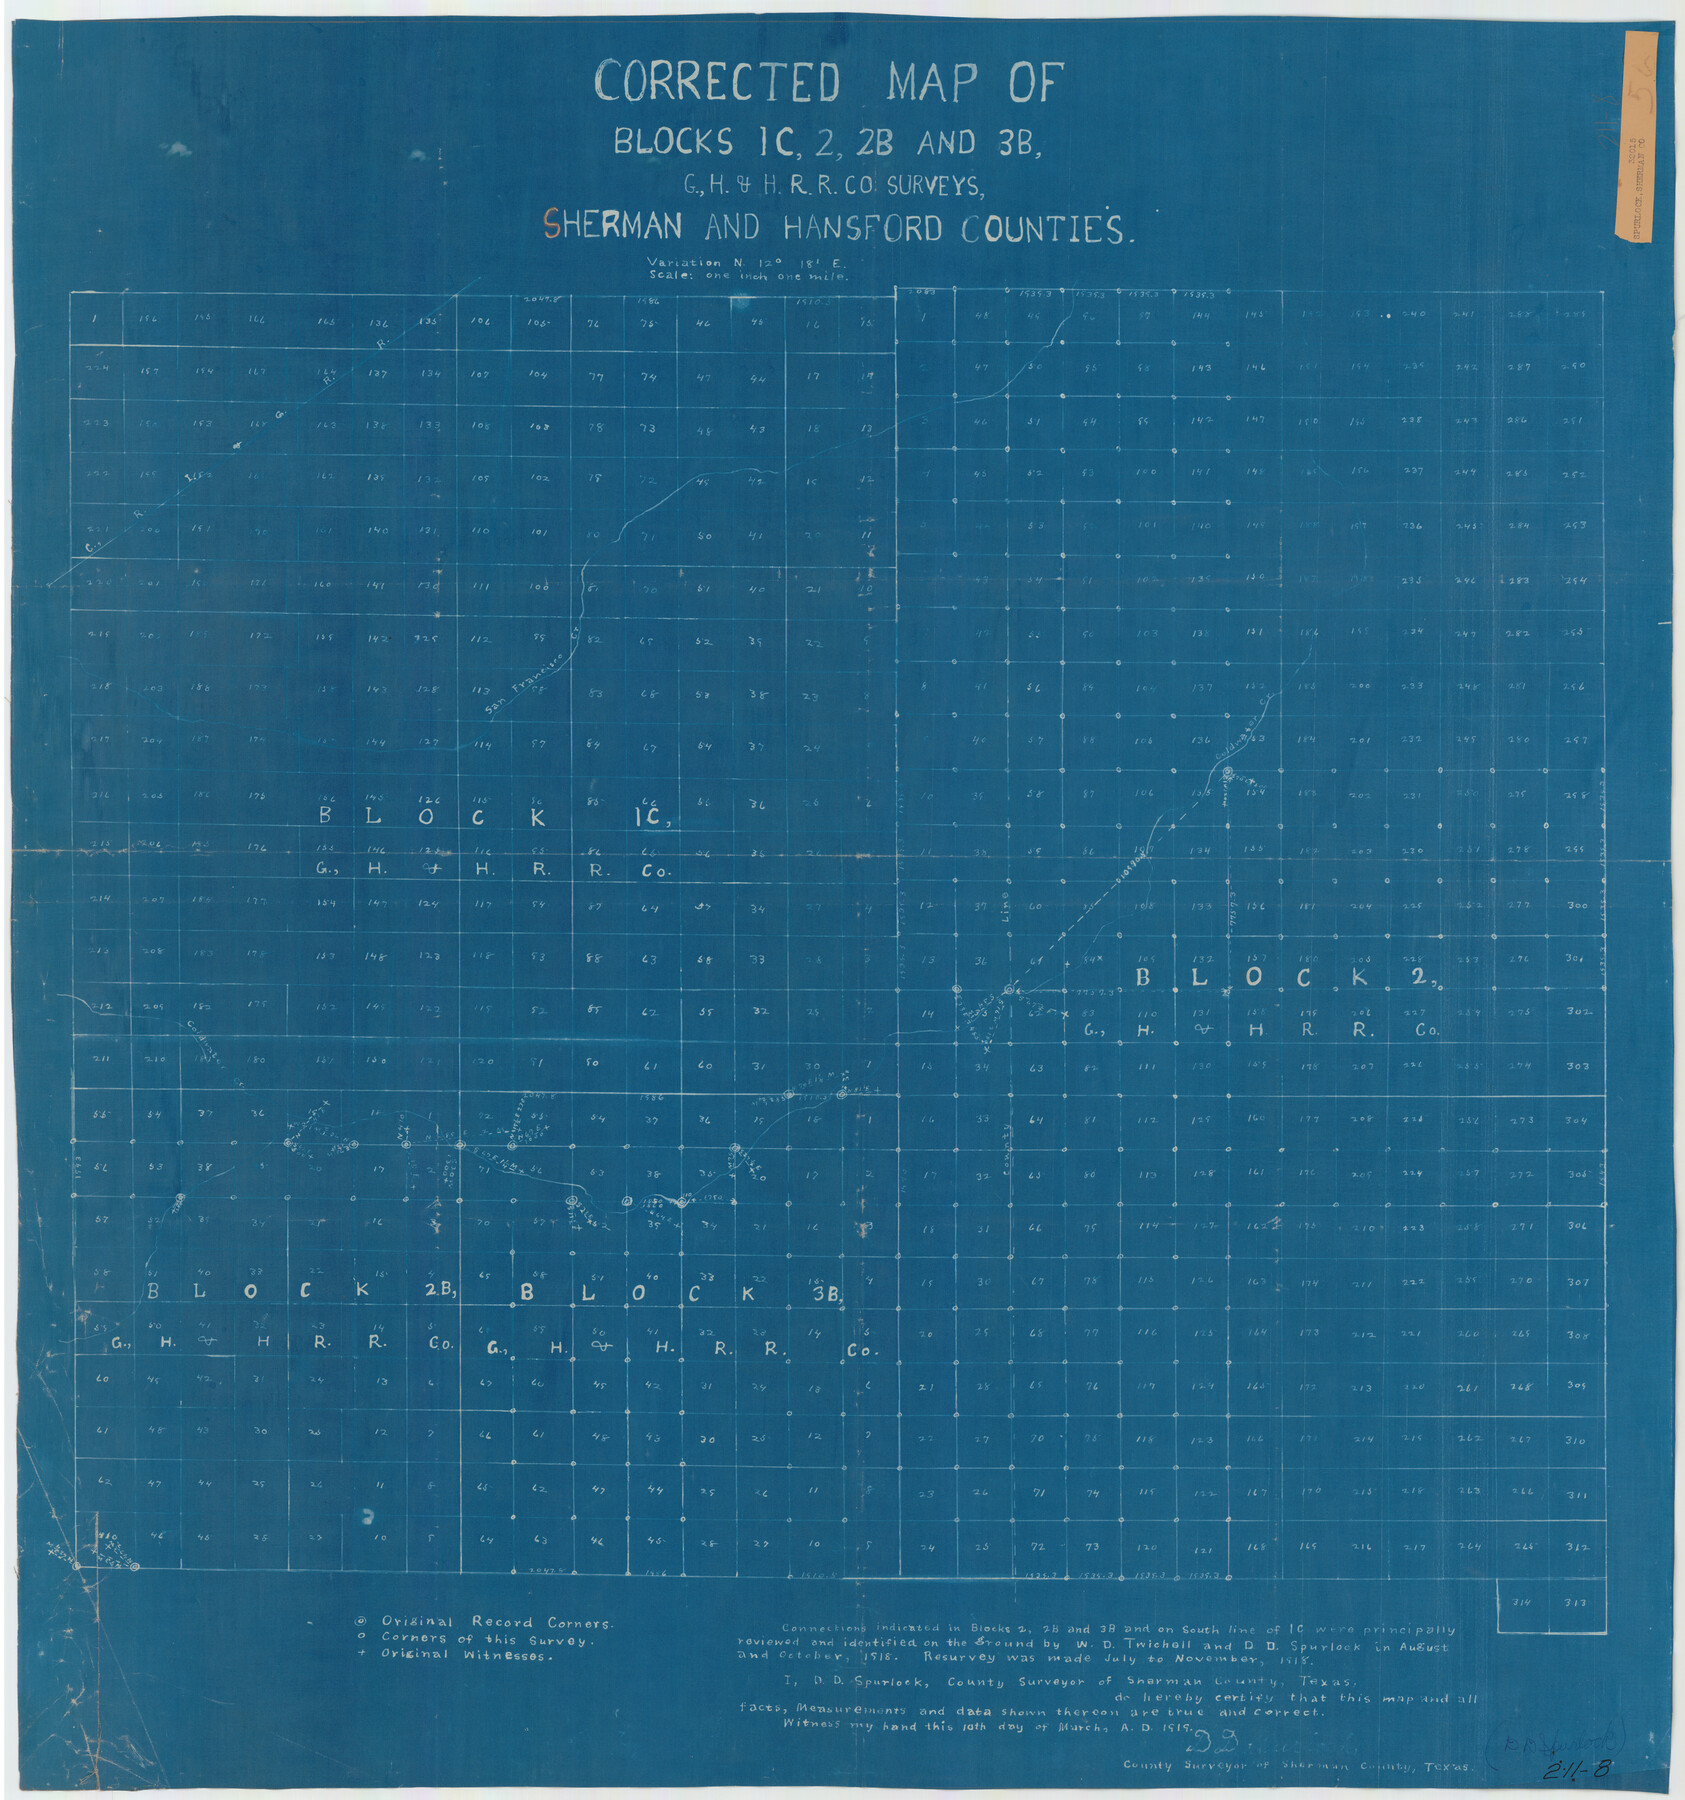 91924, Corrected Map of Blocks 1C, 2, 2B and 3B, G. H. & H. RR. Co. Surveys, Sherman and Hansford Counties, Twichell Survey Records